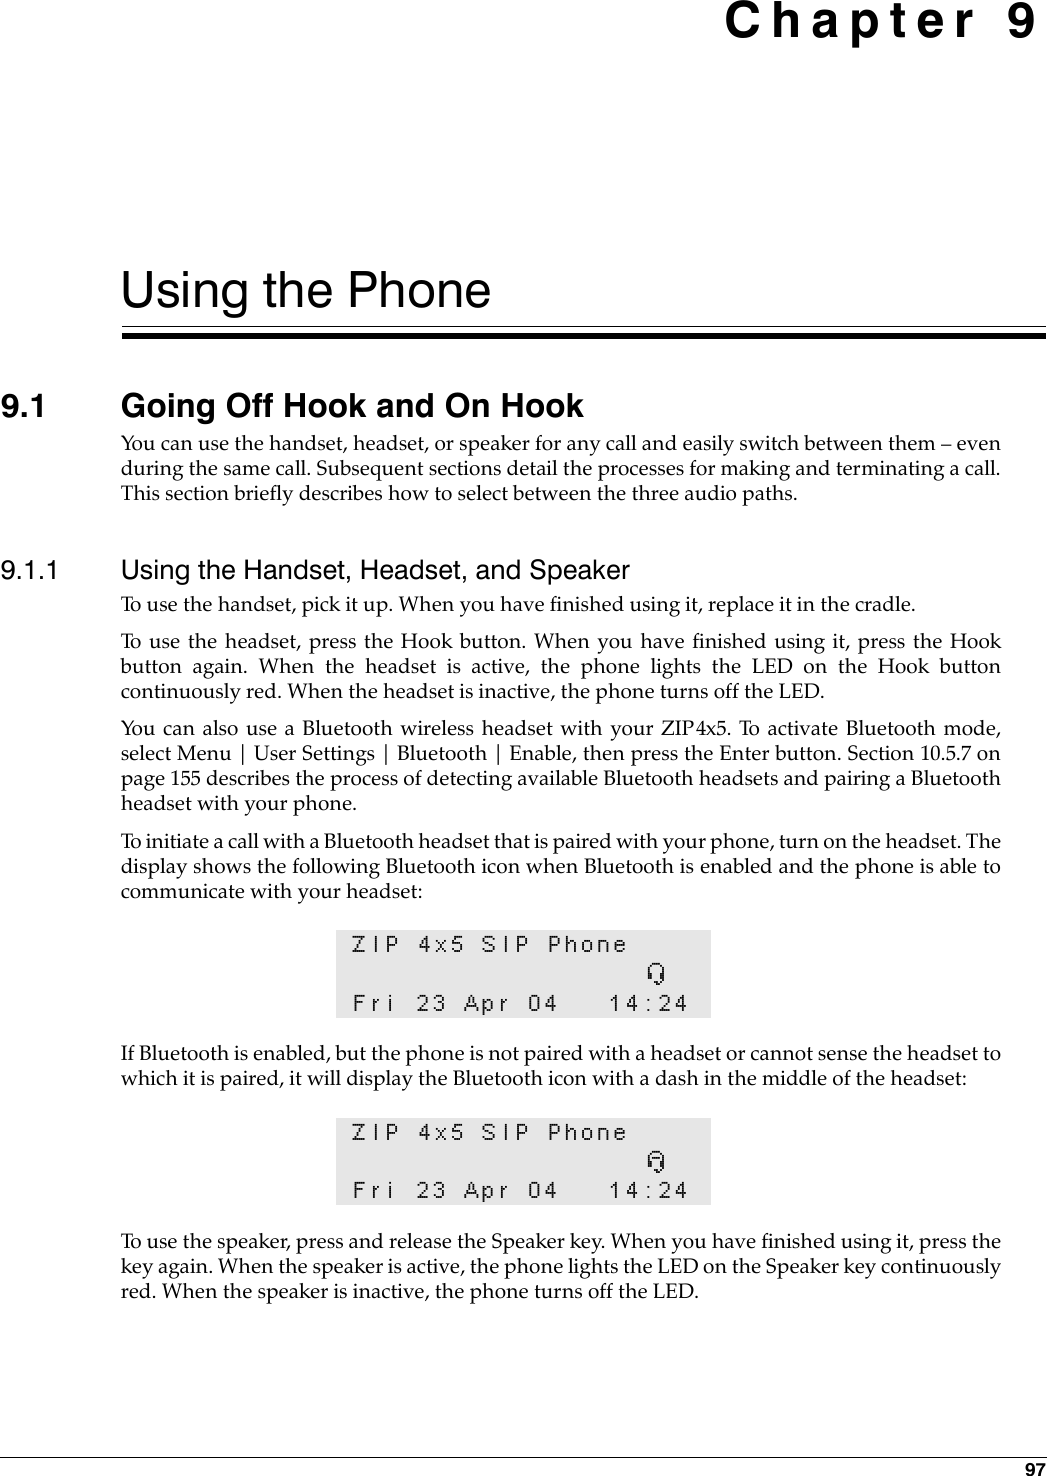 97 Chapter 9Using the Phone9.1 Going Off Hook and On HookYou can use the handset, headset, or speaker for any call and easily switch between them – evenduring the same call. Subsequent sections detail the processes for making and terminating a call.This section briefly describes how to select between the three audio paths.9.1.1 Using the Handset, Headset, and SpeakerTo use the handset, pick it up. When you have finished using it, replace it in the cradle.To use the headset, press the Hook button. When you have finished using it, press the Hookbutton again. When the headset is active, the phone lights the LED on the Hook buttoncontinuously red. When the headset is inactive, the phone turns off the LED. You can also use a Bluetooth wireless headset with your ZIP4x5. To activate Bluetooth mode,select Menu | User Settings | Bluetooth | Enable, then press the Enter button. Section 10.5.7 onpage 155 describes the process of detecting available Bluetooth headsets and pairing a Bluetoothheadset with your phone. To initiate a call with a Bluetooth headset that is paired with your phone, turn on the headset. Thedisplay shows the following Bluetooth icon when Bluetooth is enabled and the phone is able tocommunicate with your headset:If Bluetooth is enabled, but the phone is not paired with a headset or cannot sense the headset towhich it is paired, it will display the Bluetooth icon with a dash in the middle of the headset:To use the speaker, press and release the Speaker key. When you have finished using it, press thekey again. When the speaker is active, the phone lights the LED on the Speaker key continuouslyred. When the speaker is inactive, the phone turns off the LED.ZIP 4x5 SIP PhoneúFri 23 Apr 04 14:24ZIP 4x5 SIP PhoneùFri 23 Apr 04 14:24